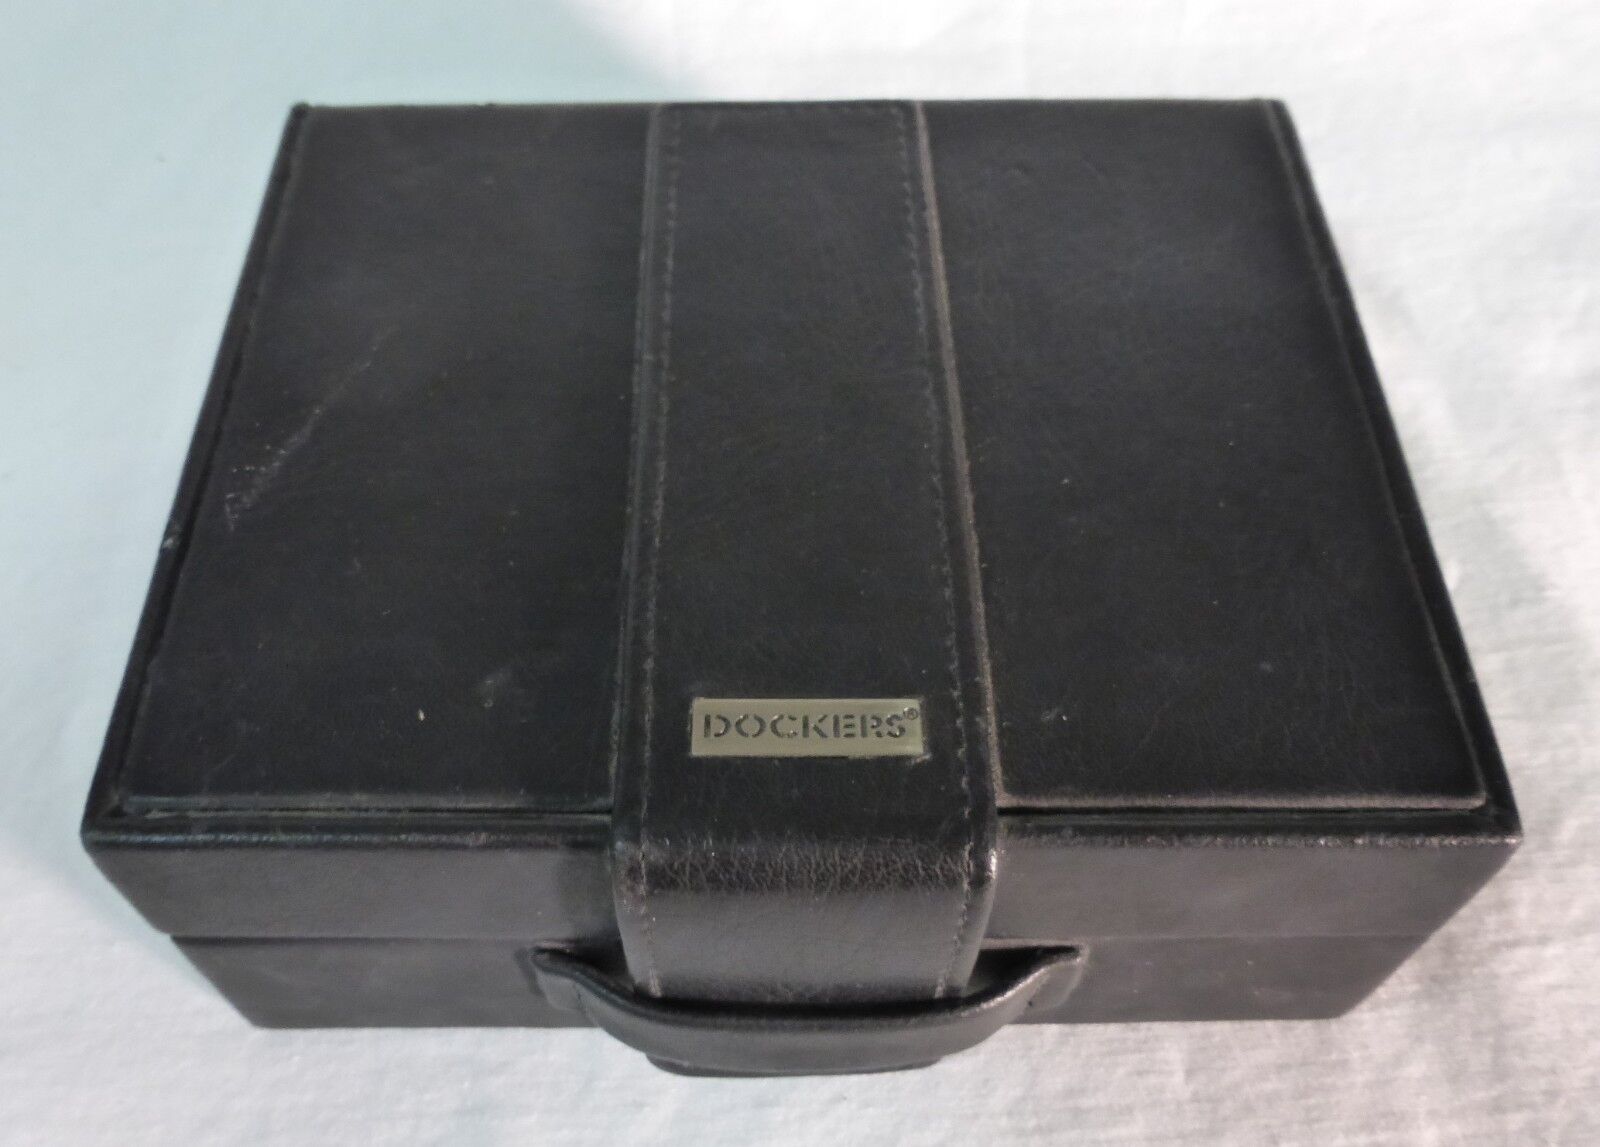 Dockers watch box black with closer